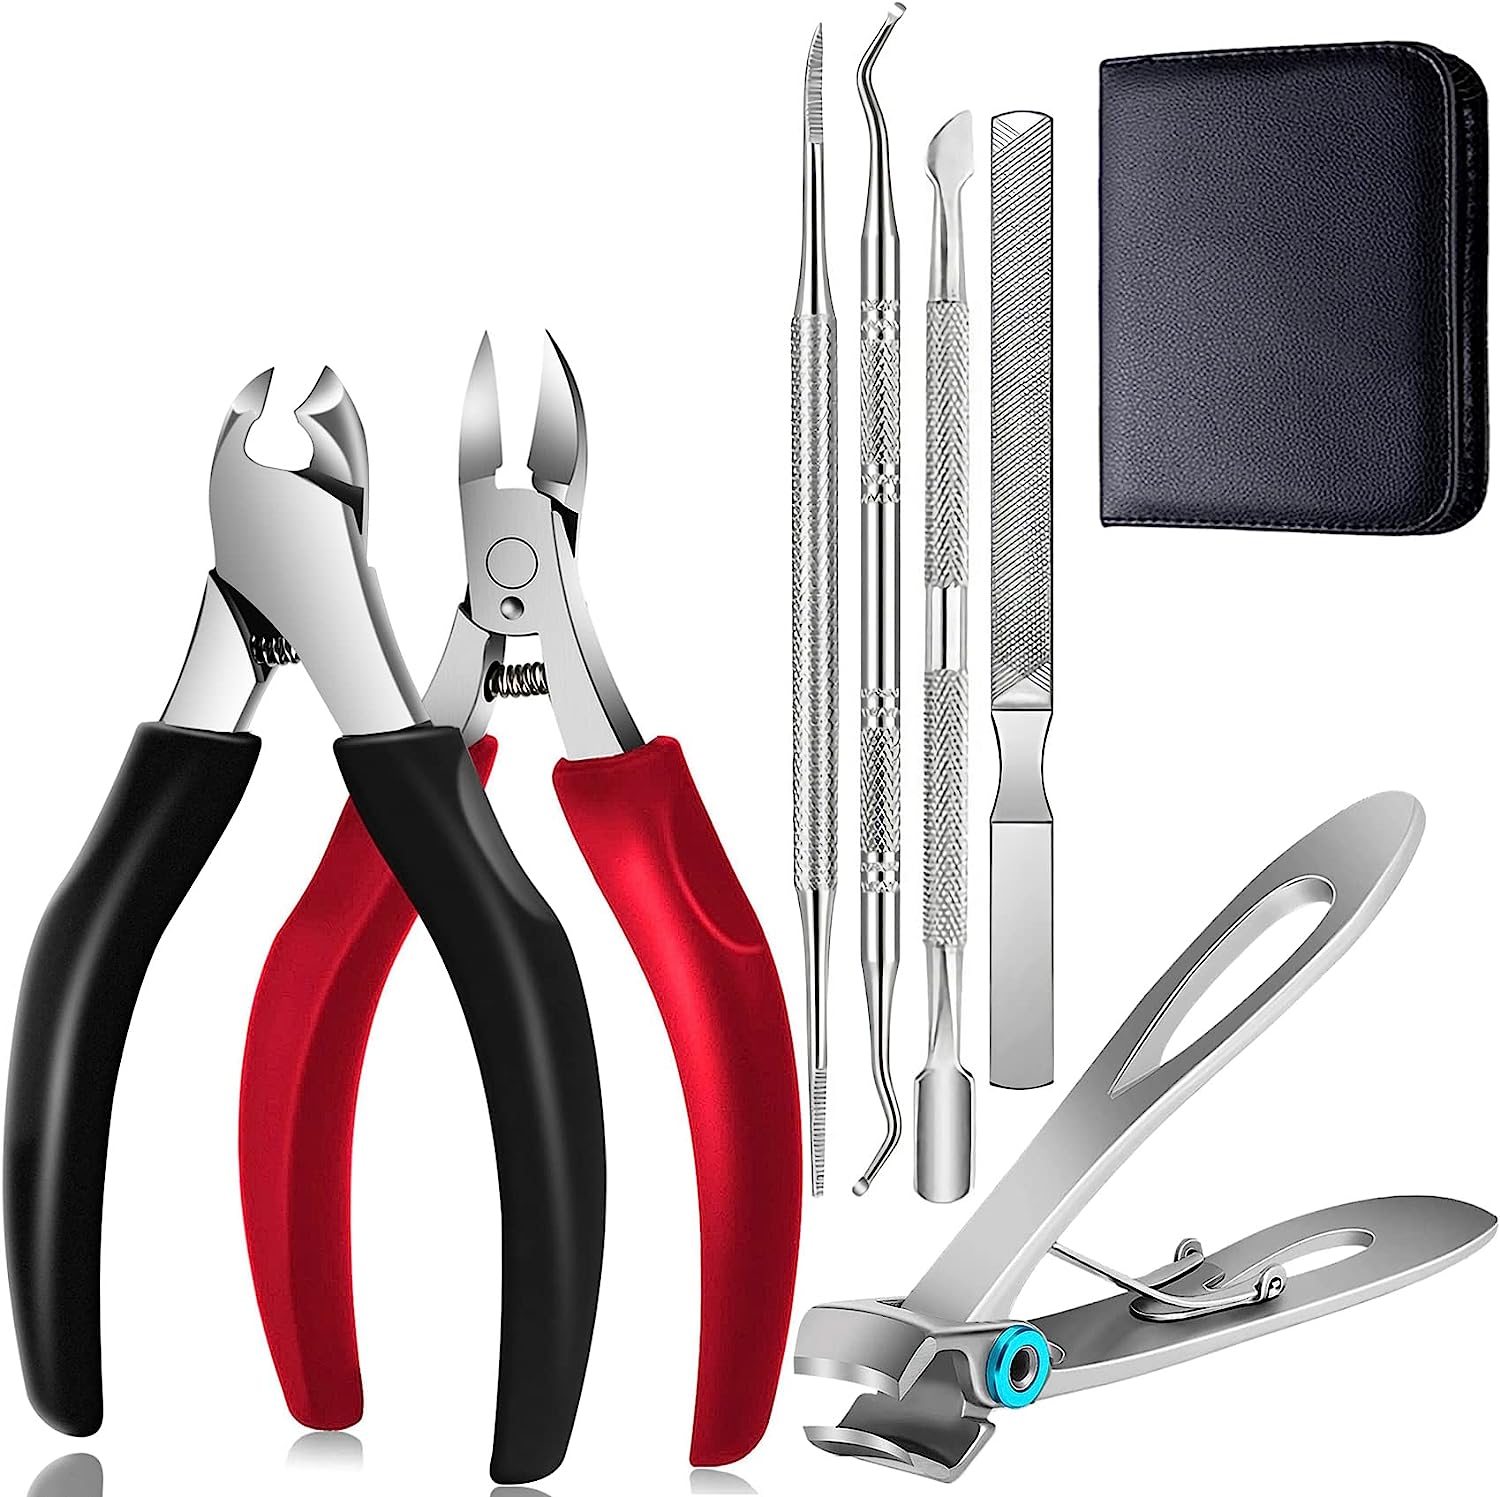 Professional footnail pliers set, nail tongs for thick & ingrown hard toenails. Stainless steel pedicure snap nail clipper, nail file and footnail nail scissors set bag